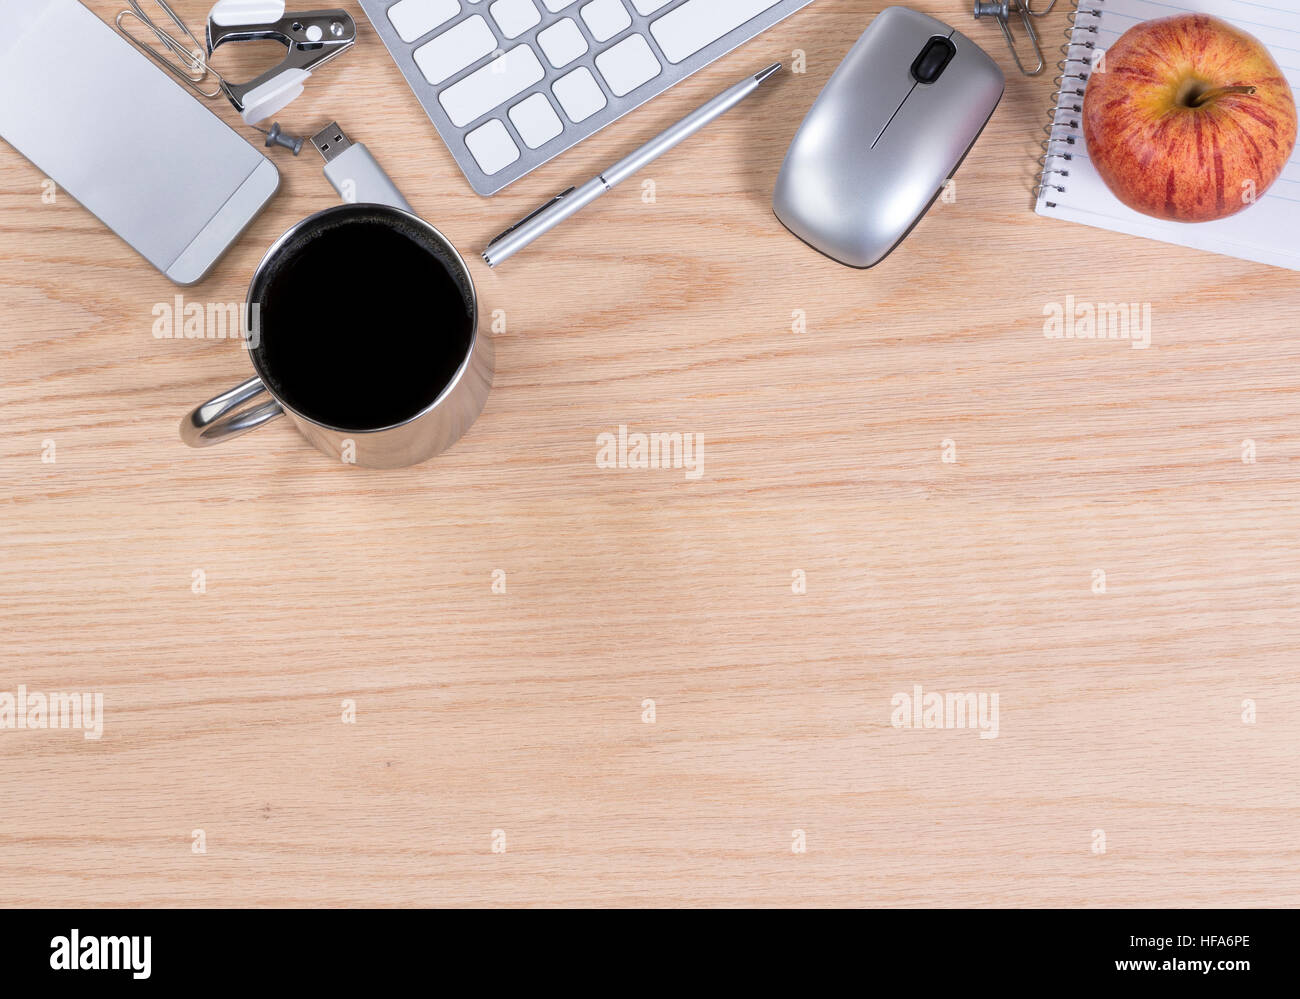 Working office desktop with computer keyboard, mouse, coffee, apple, thumb drive, pen, paper, clip, staple remover, and cell phone. Horizontal format Stock Photo